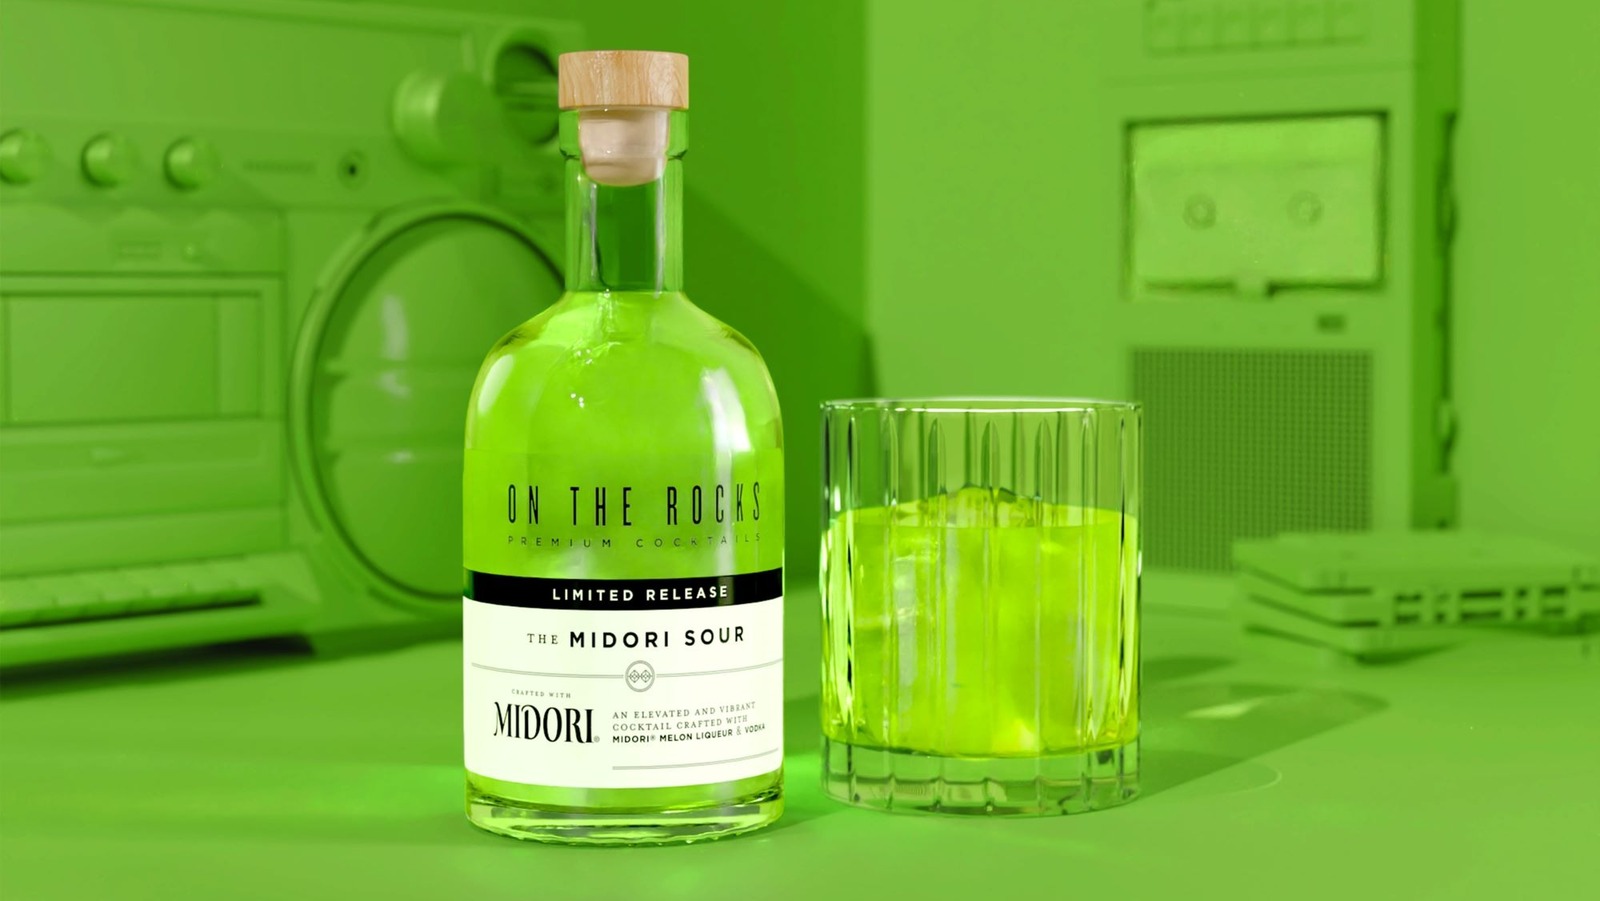 https://www.tastingtable.com/img/gallery/on-the-rocks-to-debut-ready-to-drink-midori-sour-cocktail/l-intro-1680109210.jpg